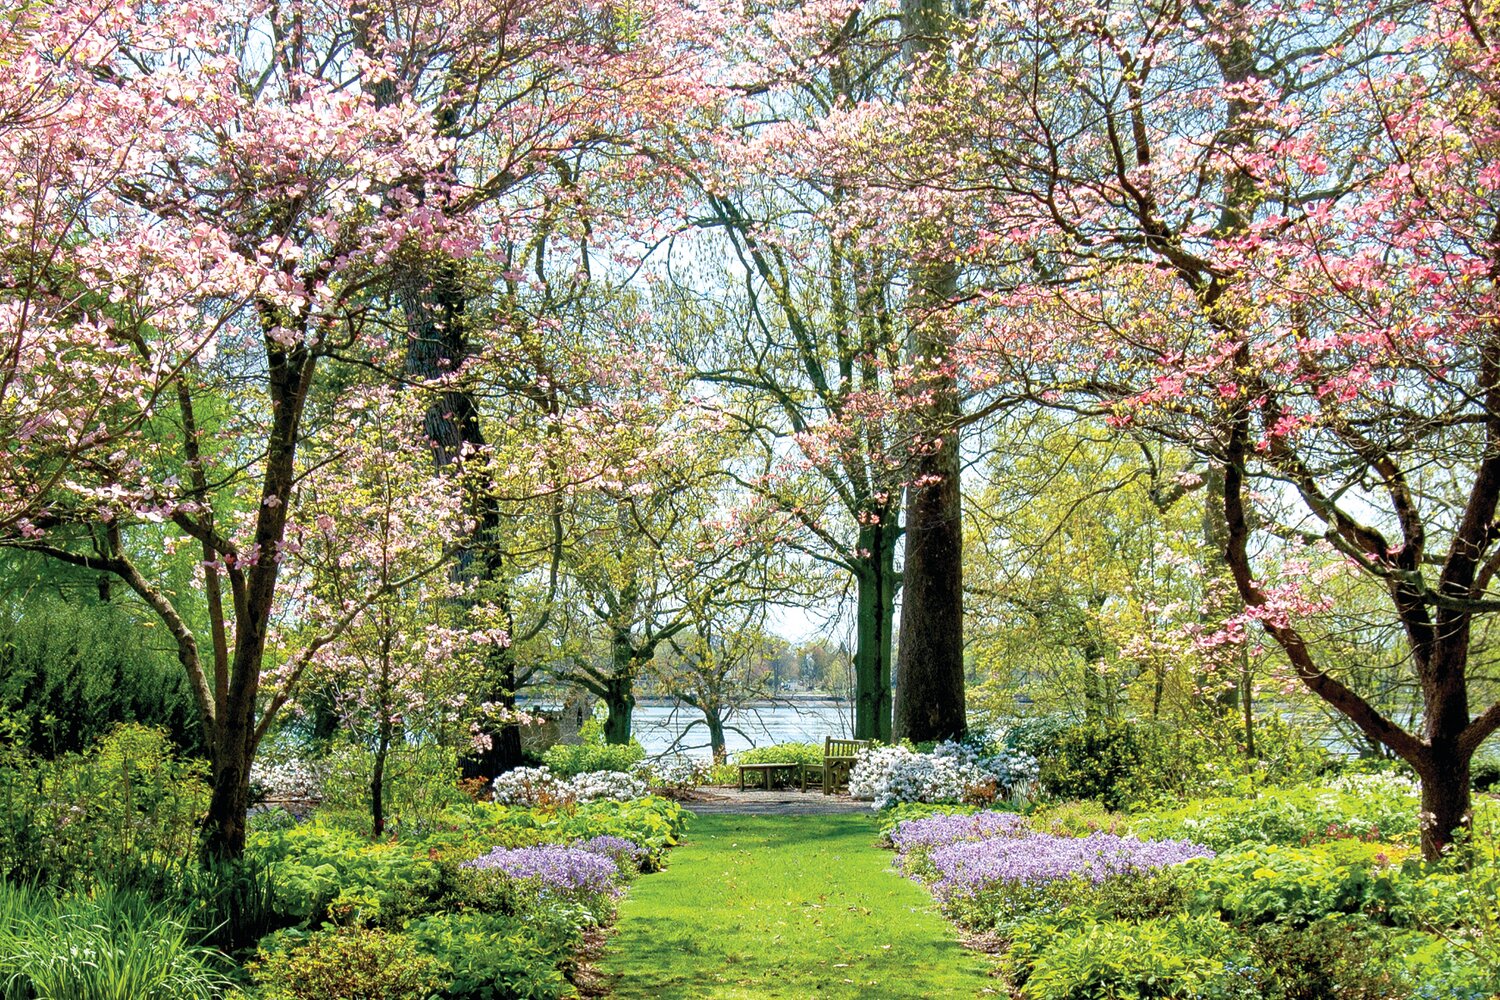 Andalusia Historic House, Gardens & Arboretum, located on the banks of the Delaware River in Bensalem will host a garden symposium at Holy Ghost Prep and at Andalusia.